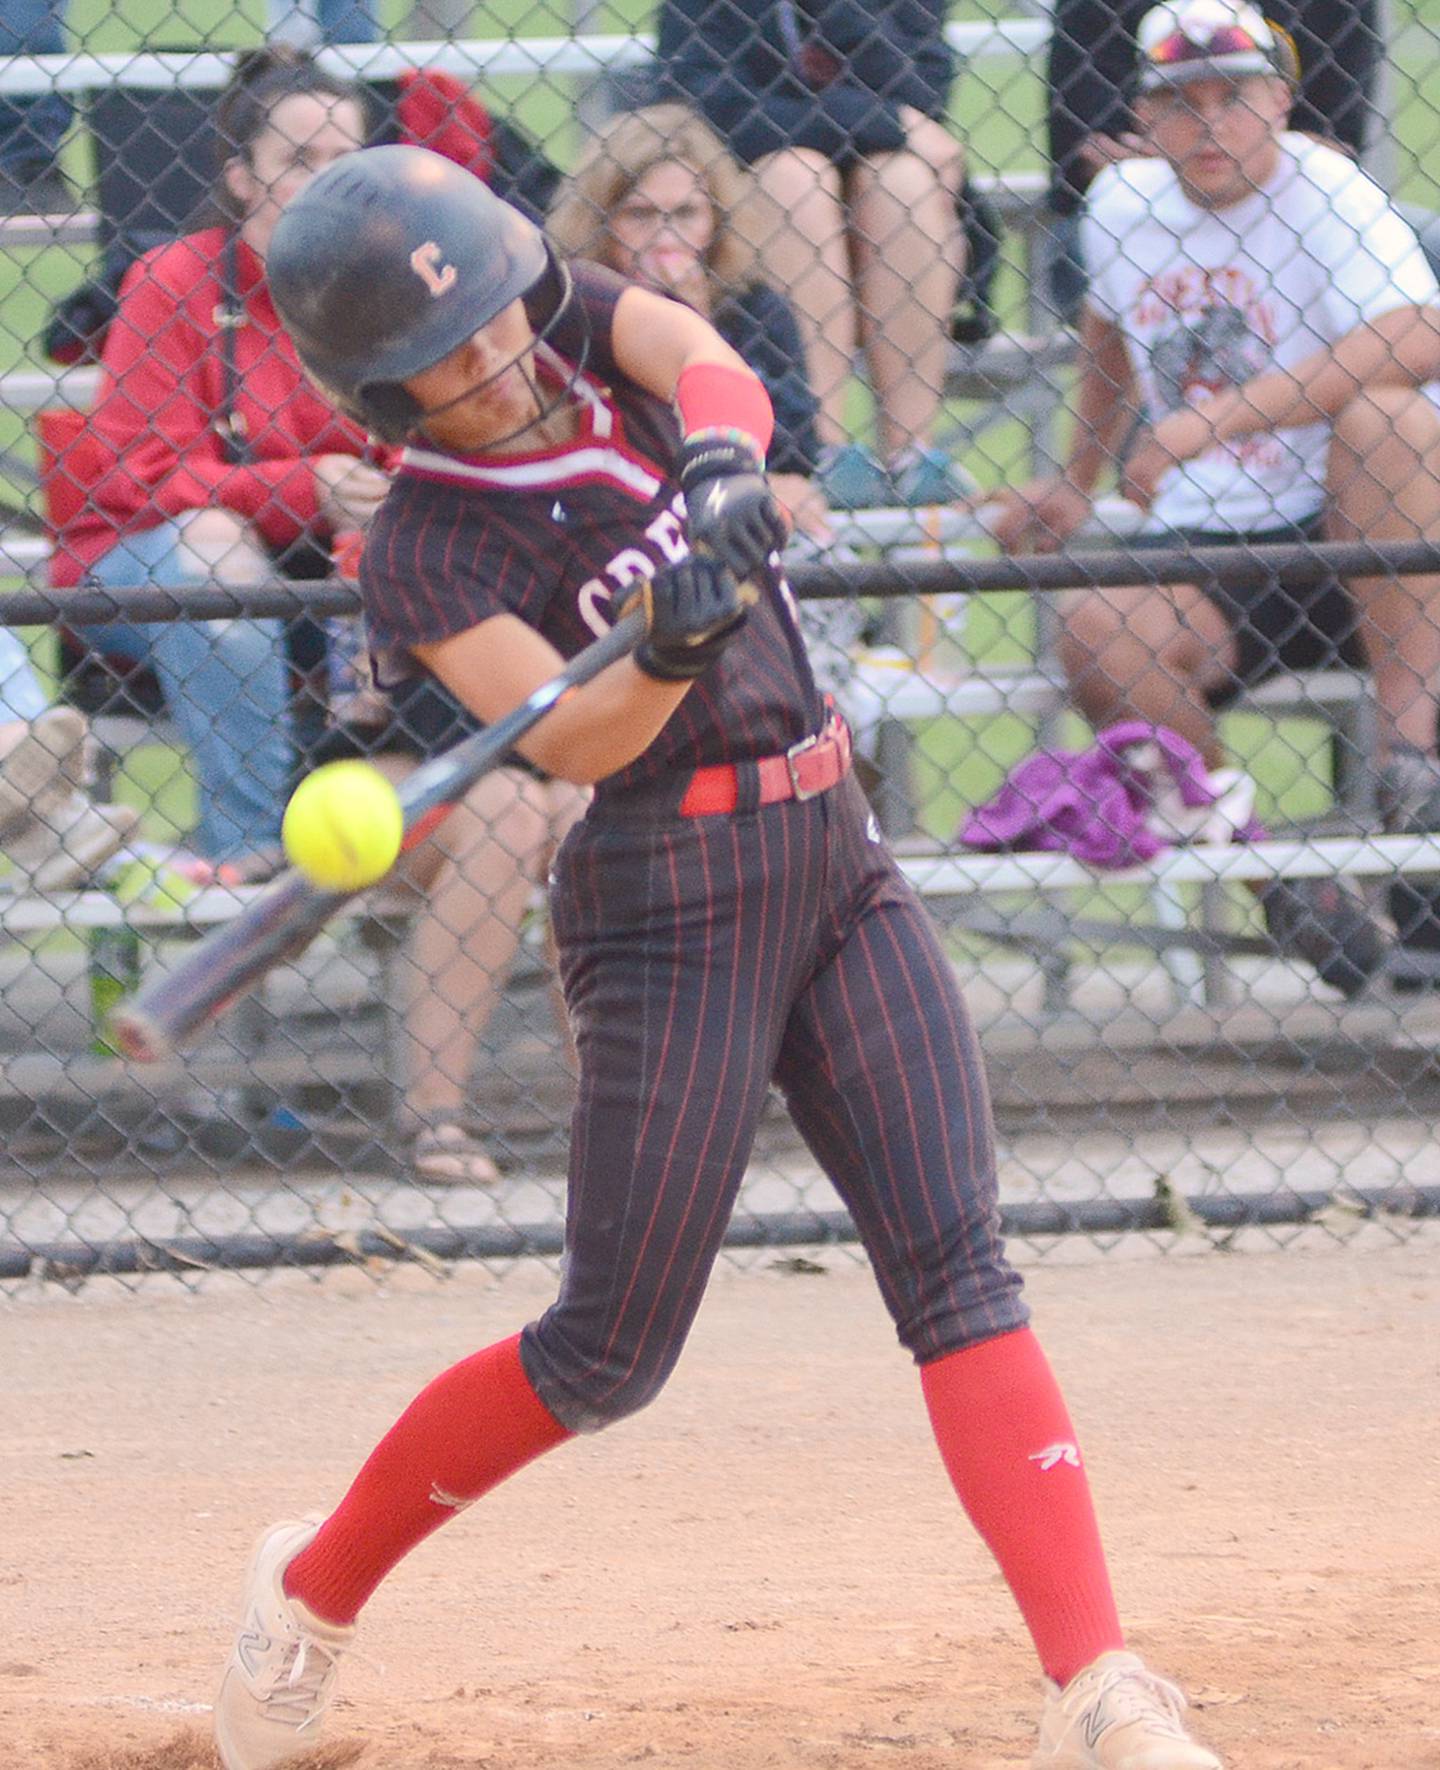 Creston's Ava Adamson connects with a pitch during Saturday's John Stephens Classic game against Earlham. Later in the game, Adamson delivered the winning RBI double in the ninth inning for the 6-5 victory.